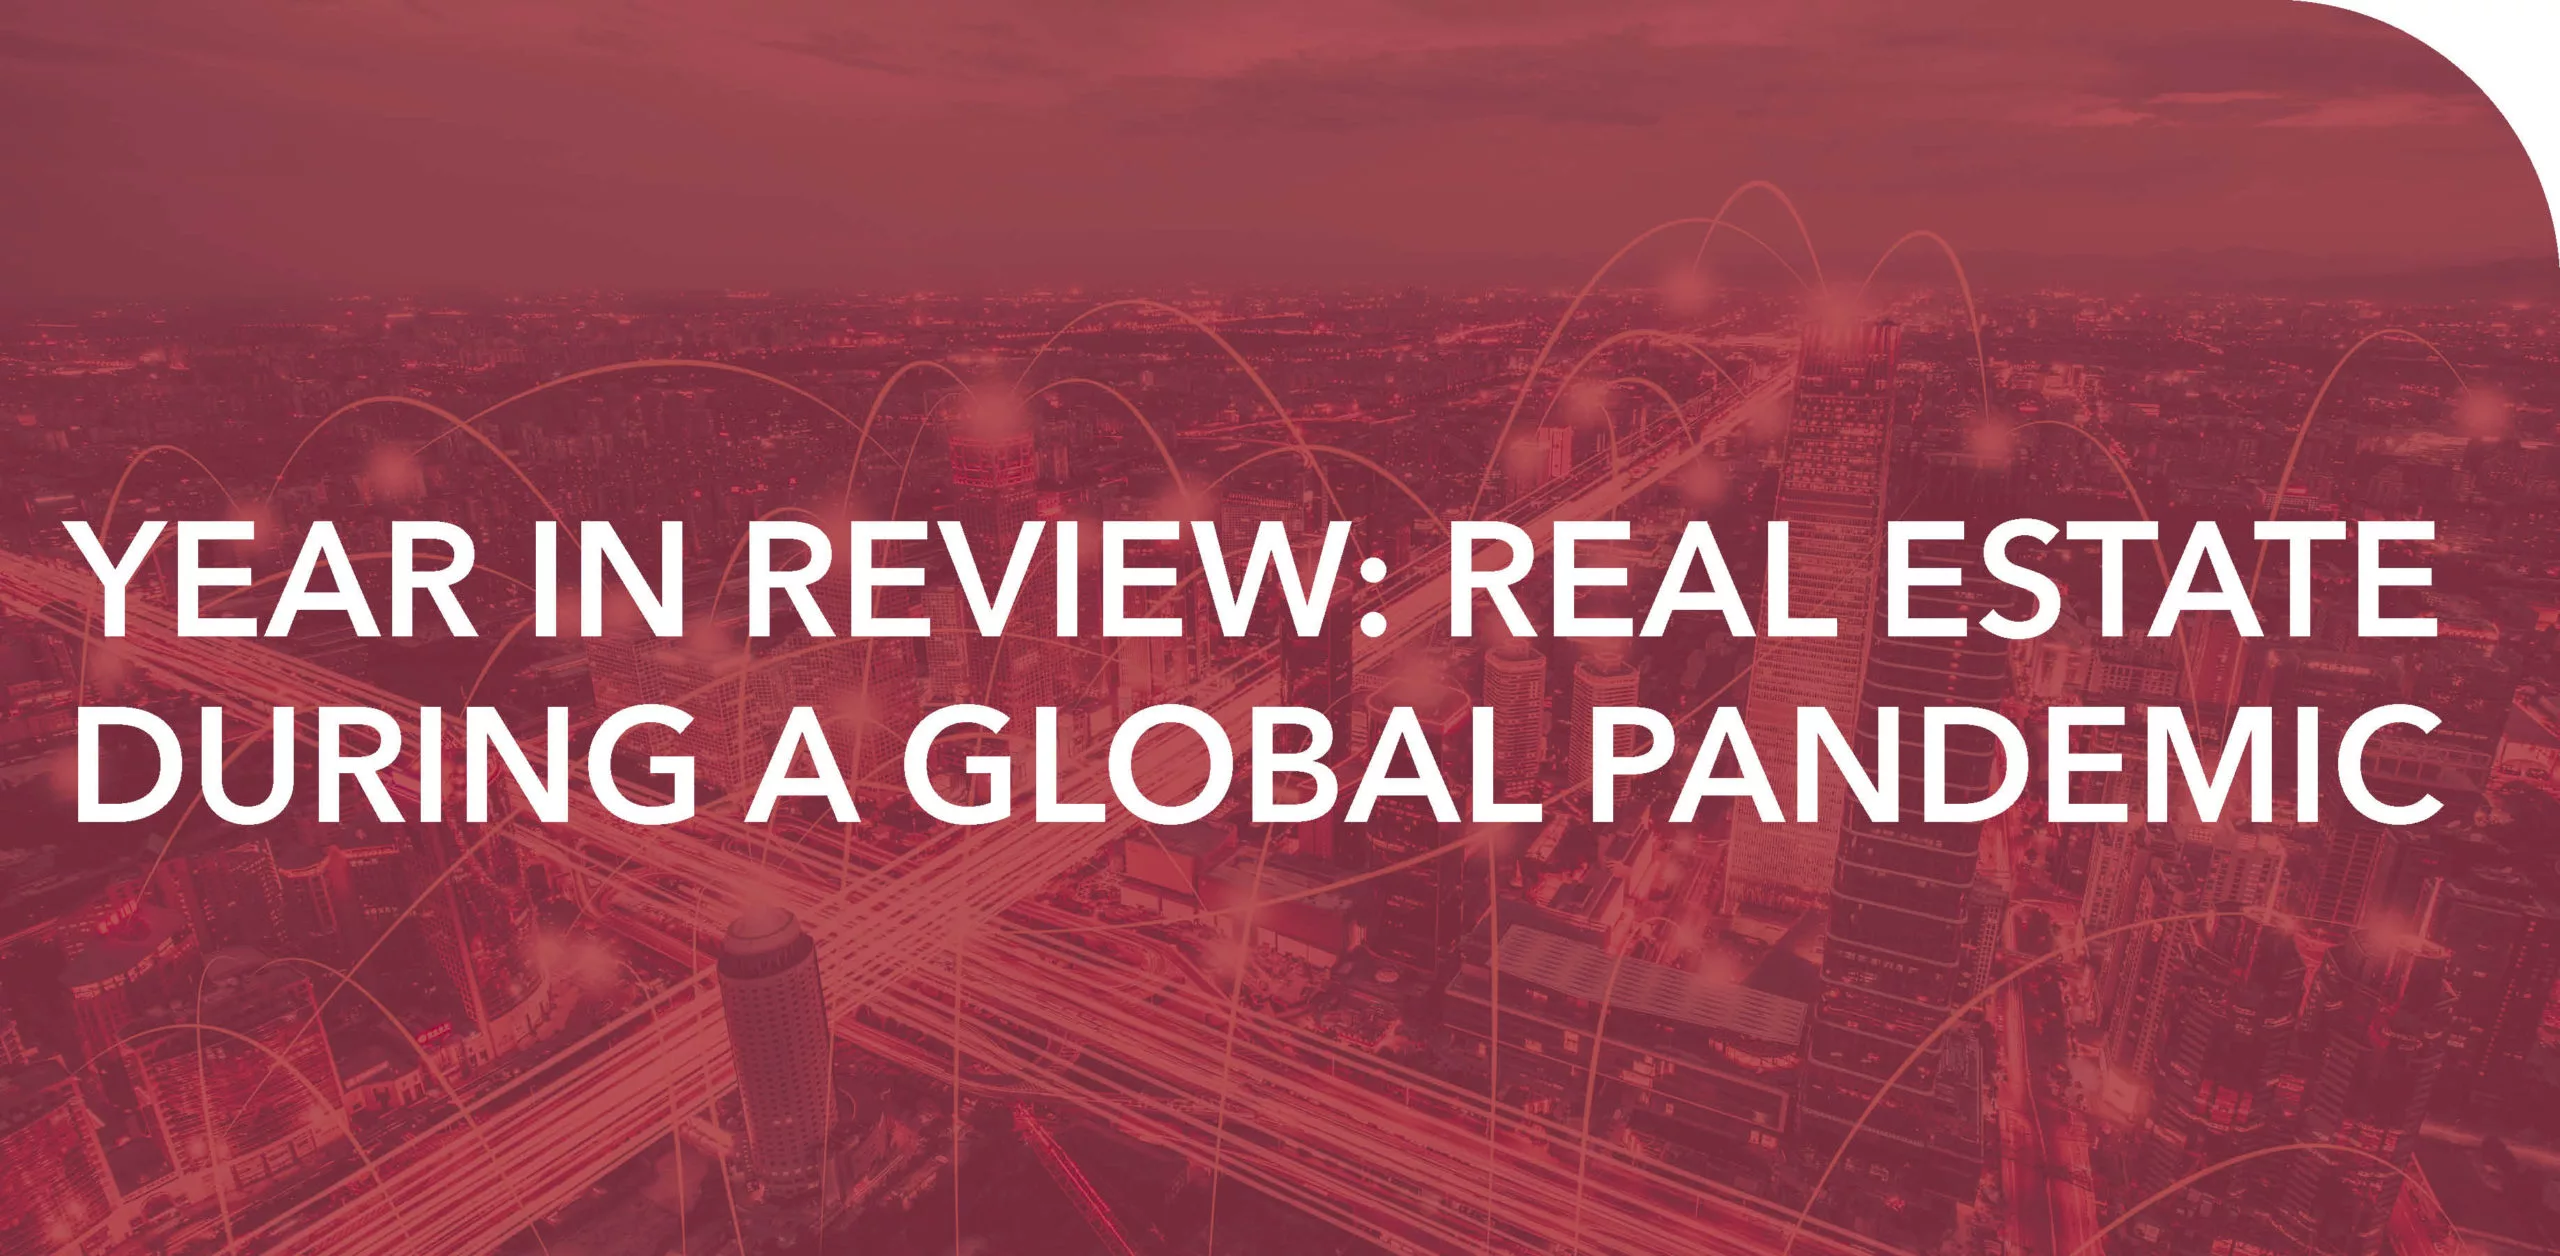 YEAR IN REVIEW: REAL ESTATE DURING A GLOBAL PANDEMIC